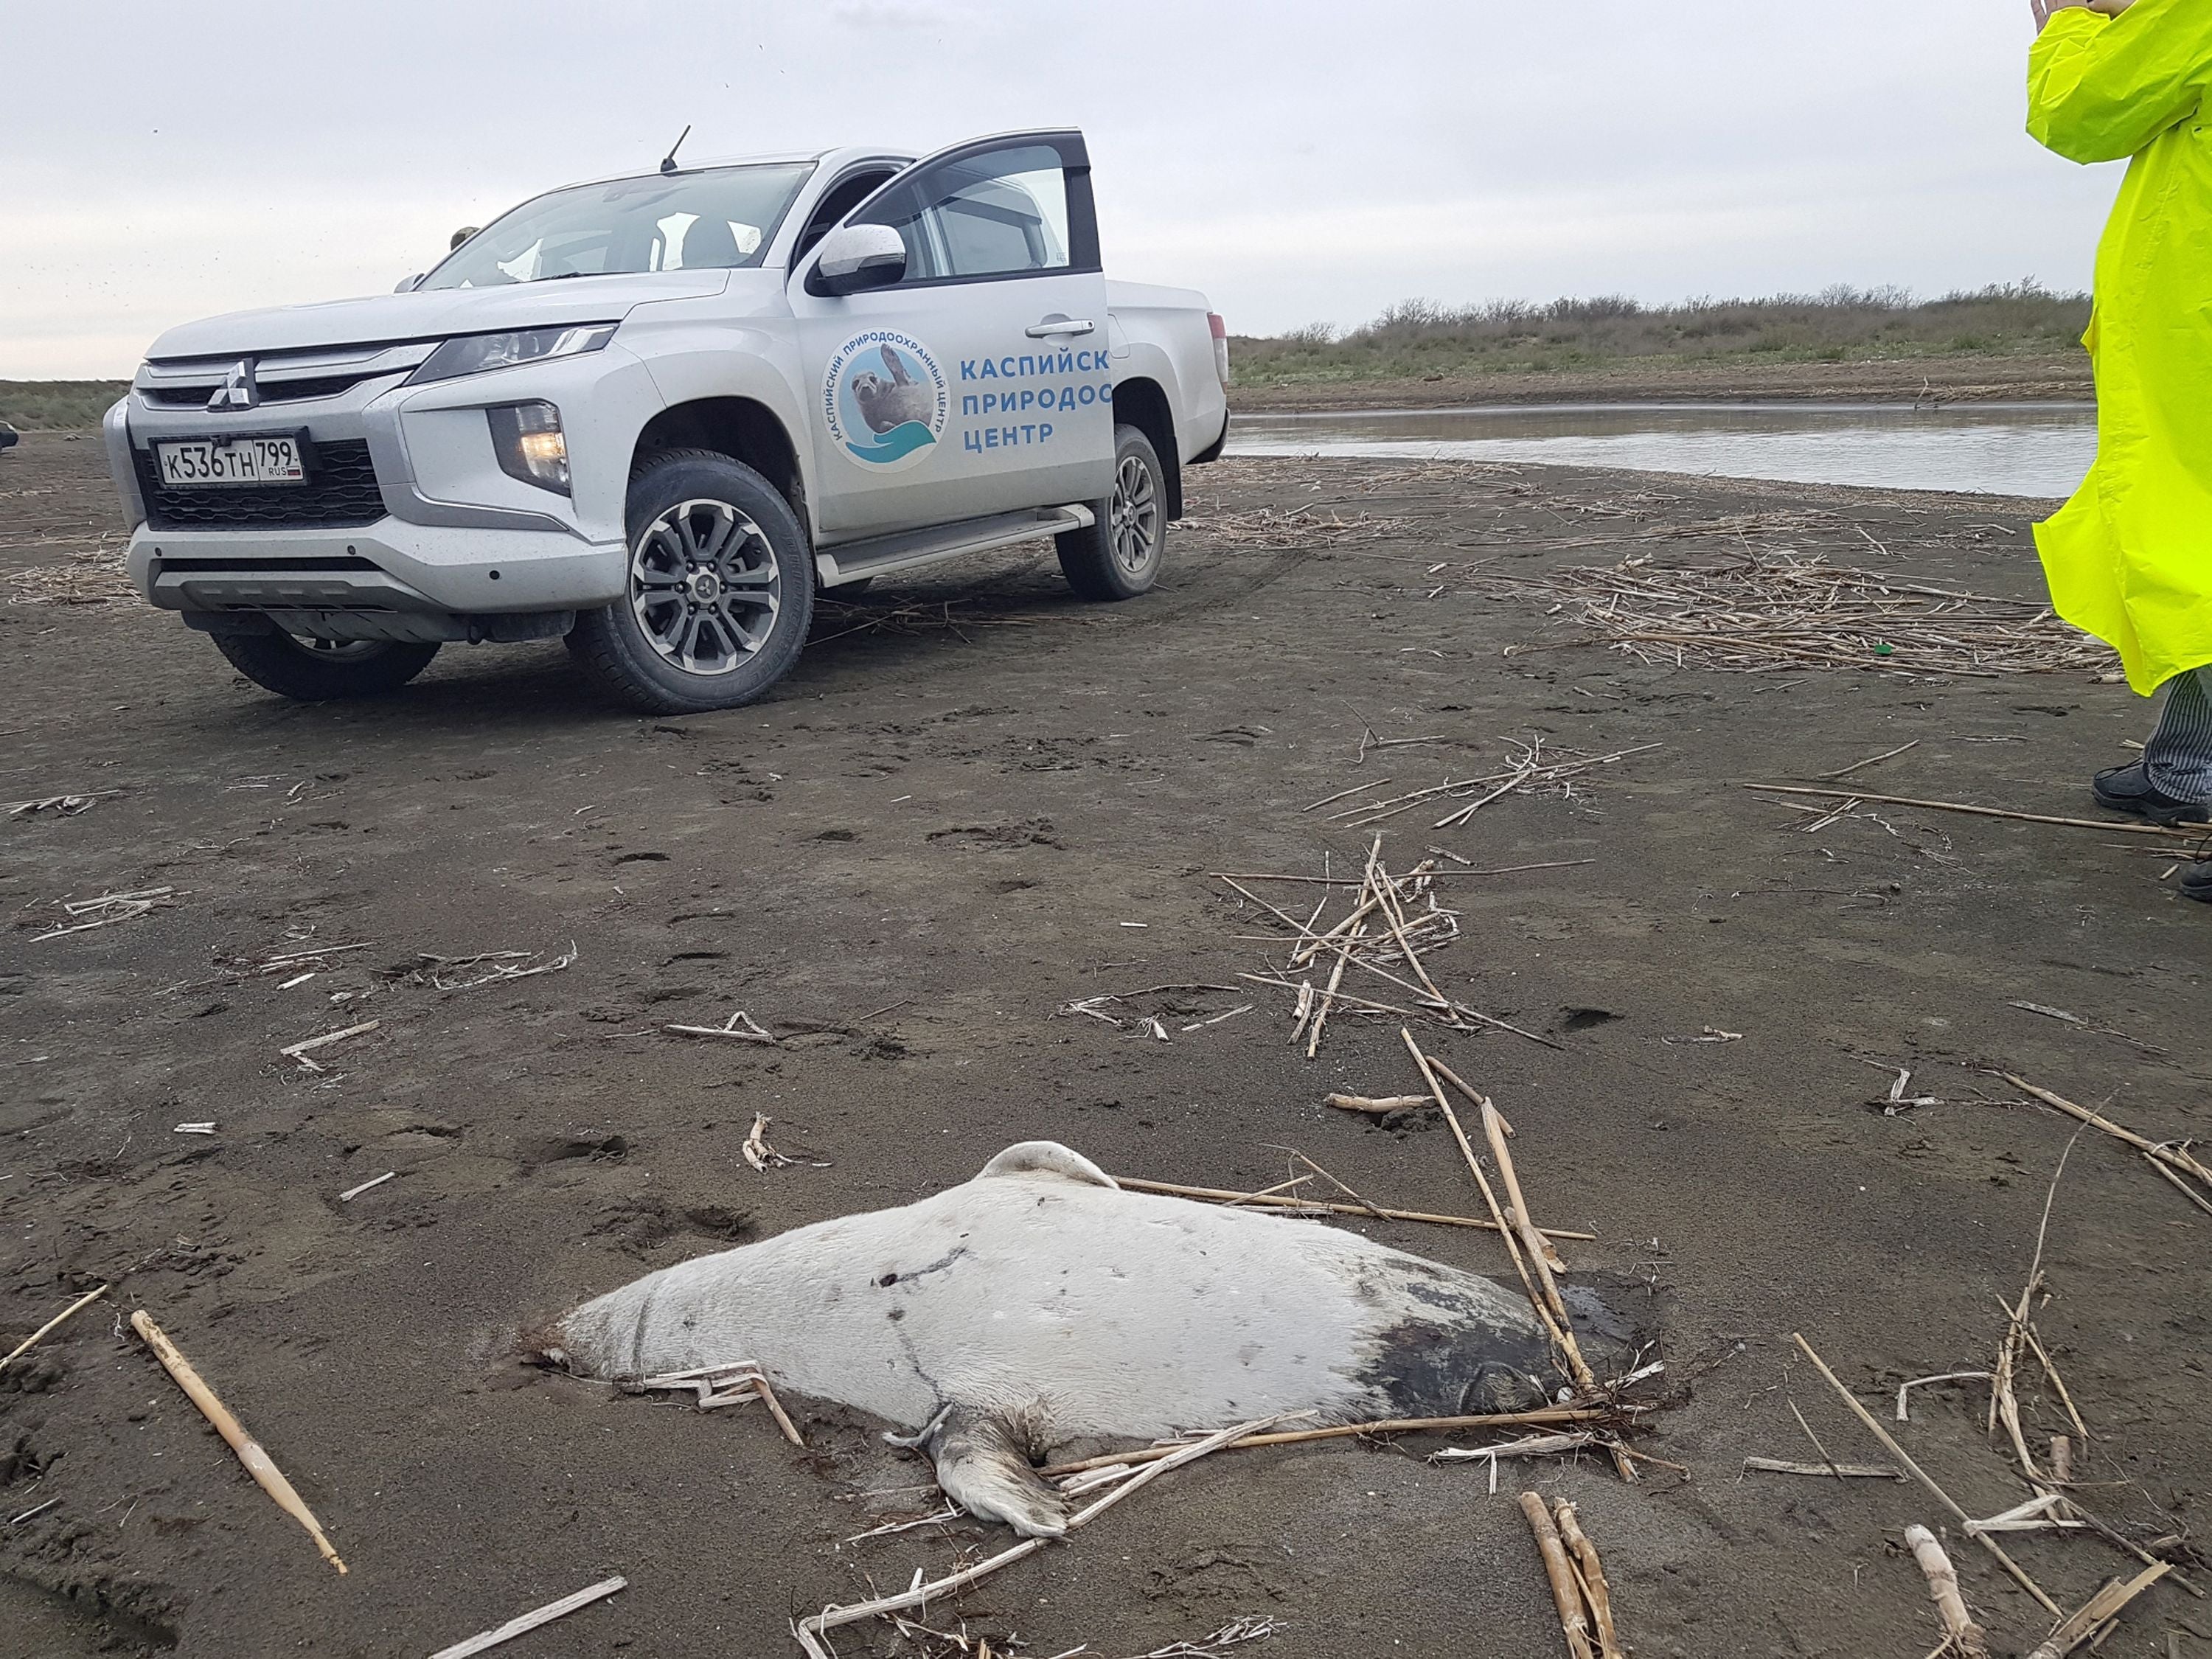 The dead seals have been washed up on the shore over the course of several days